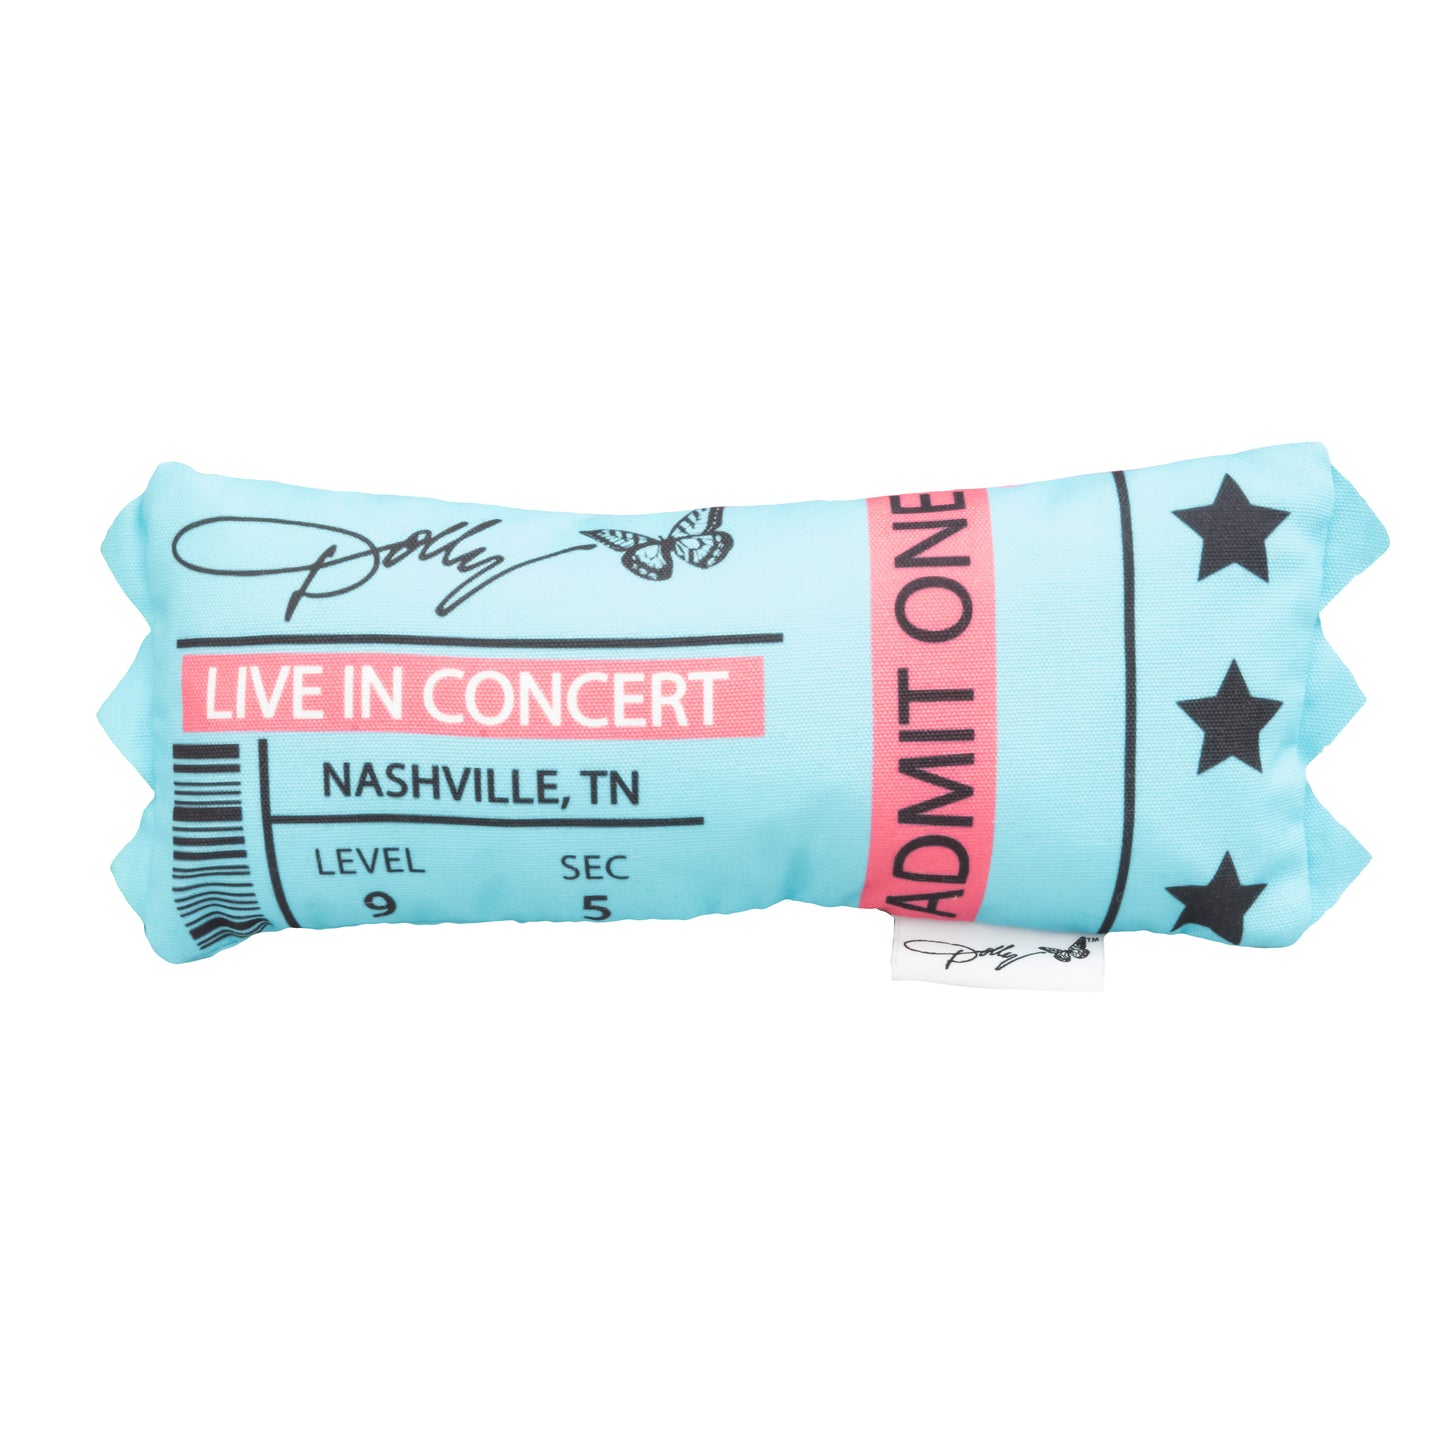 Dolly Concert Ticket Crinkle Dog Toy